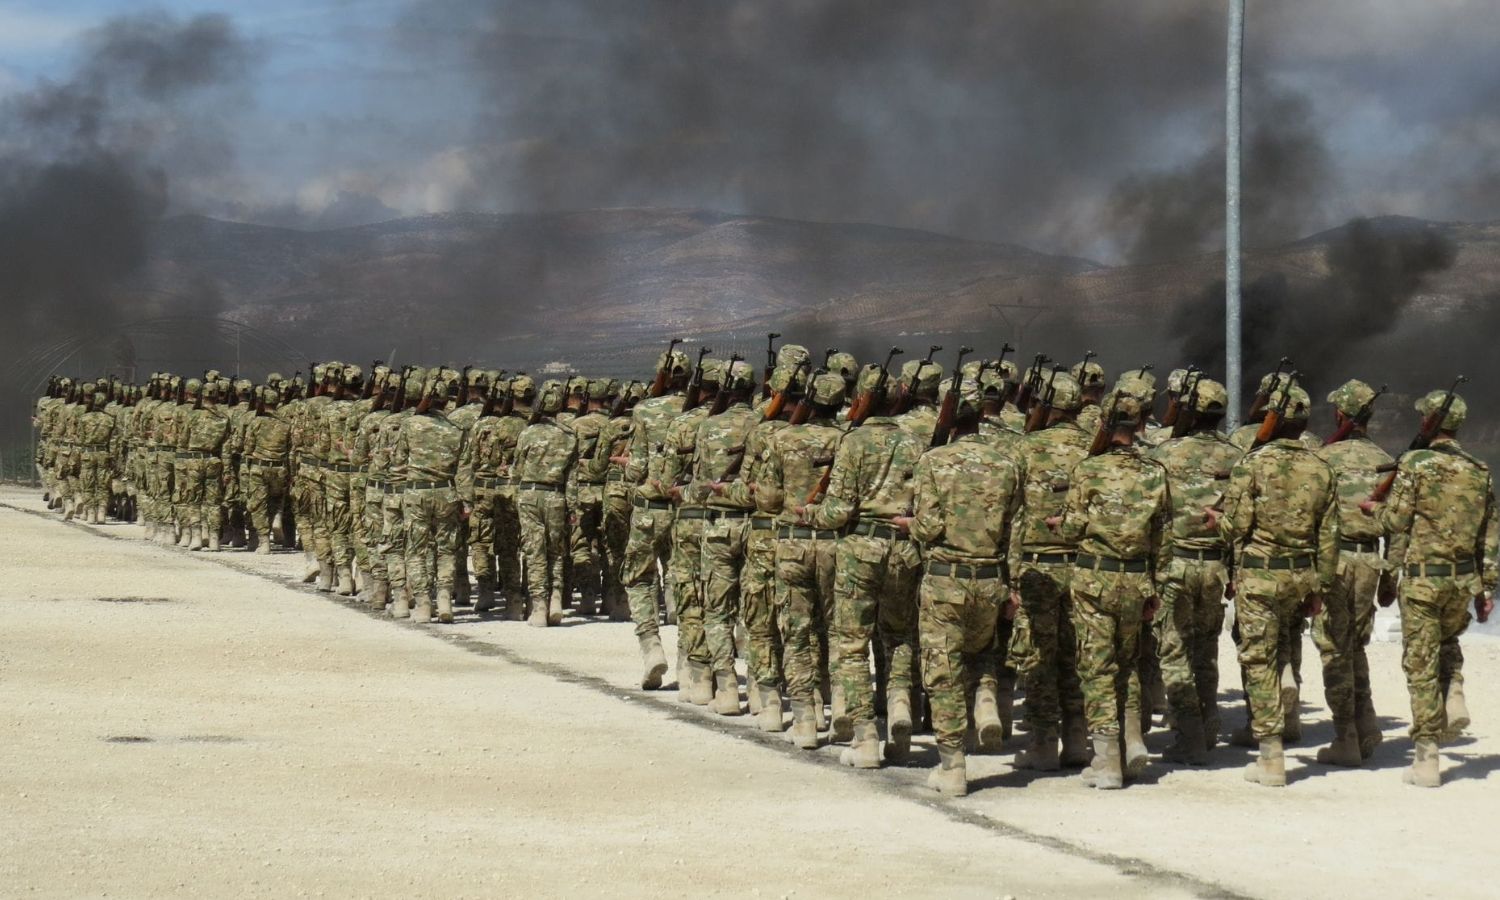 Graduation ceremony for a new batch of SNA fighters in Afrin region, north of Aleppo - March 7, 2023 (Facebook/Media Office of the Interim Government’s Defense Ministry)